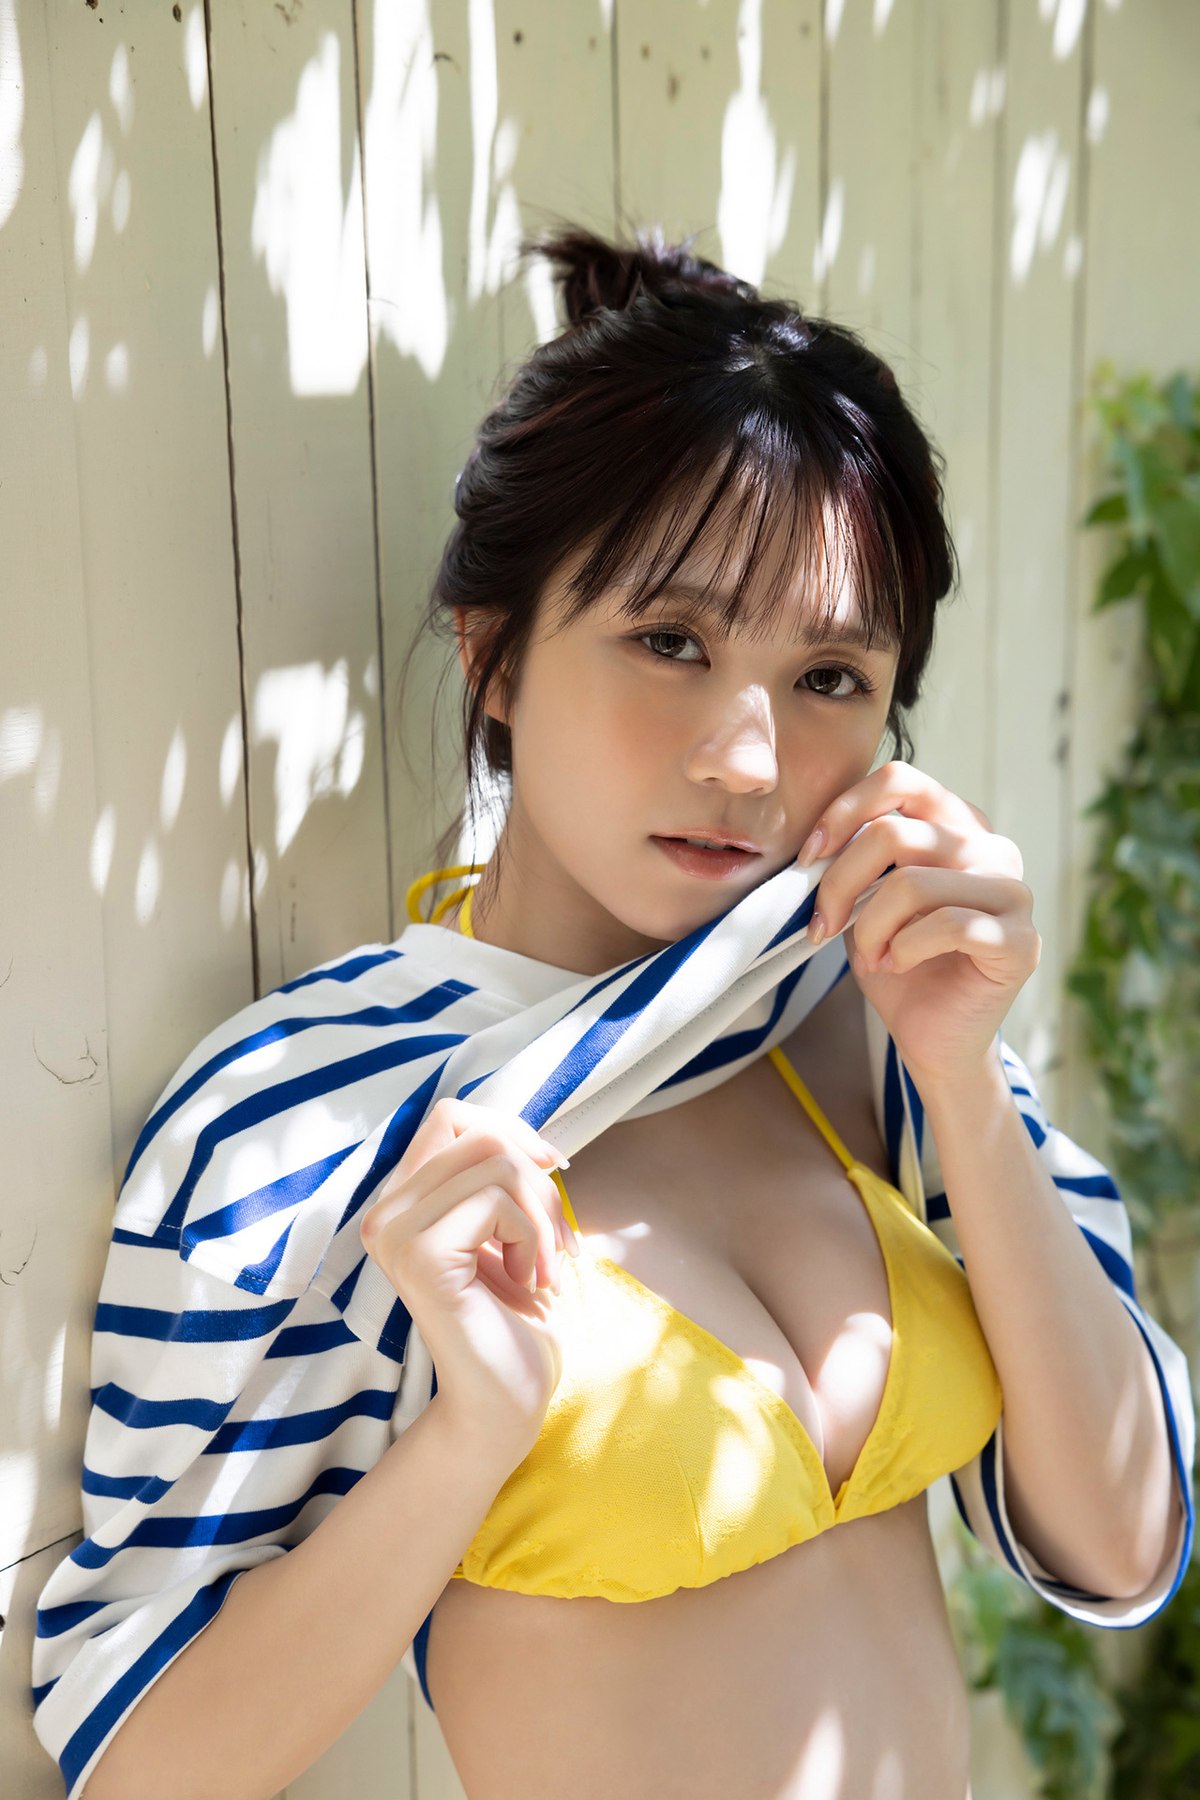 FLASH Photobook 2023 06 20 Tsumugi Hashimoto 橋本つむぎ The Best In Osaka Is The Best In Japan 0027 1089233159.jpg